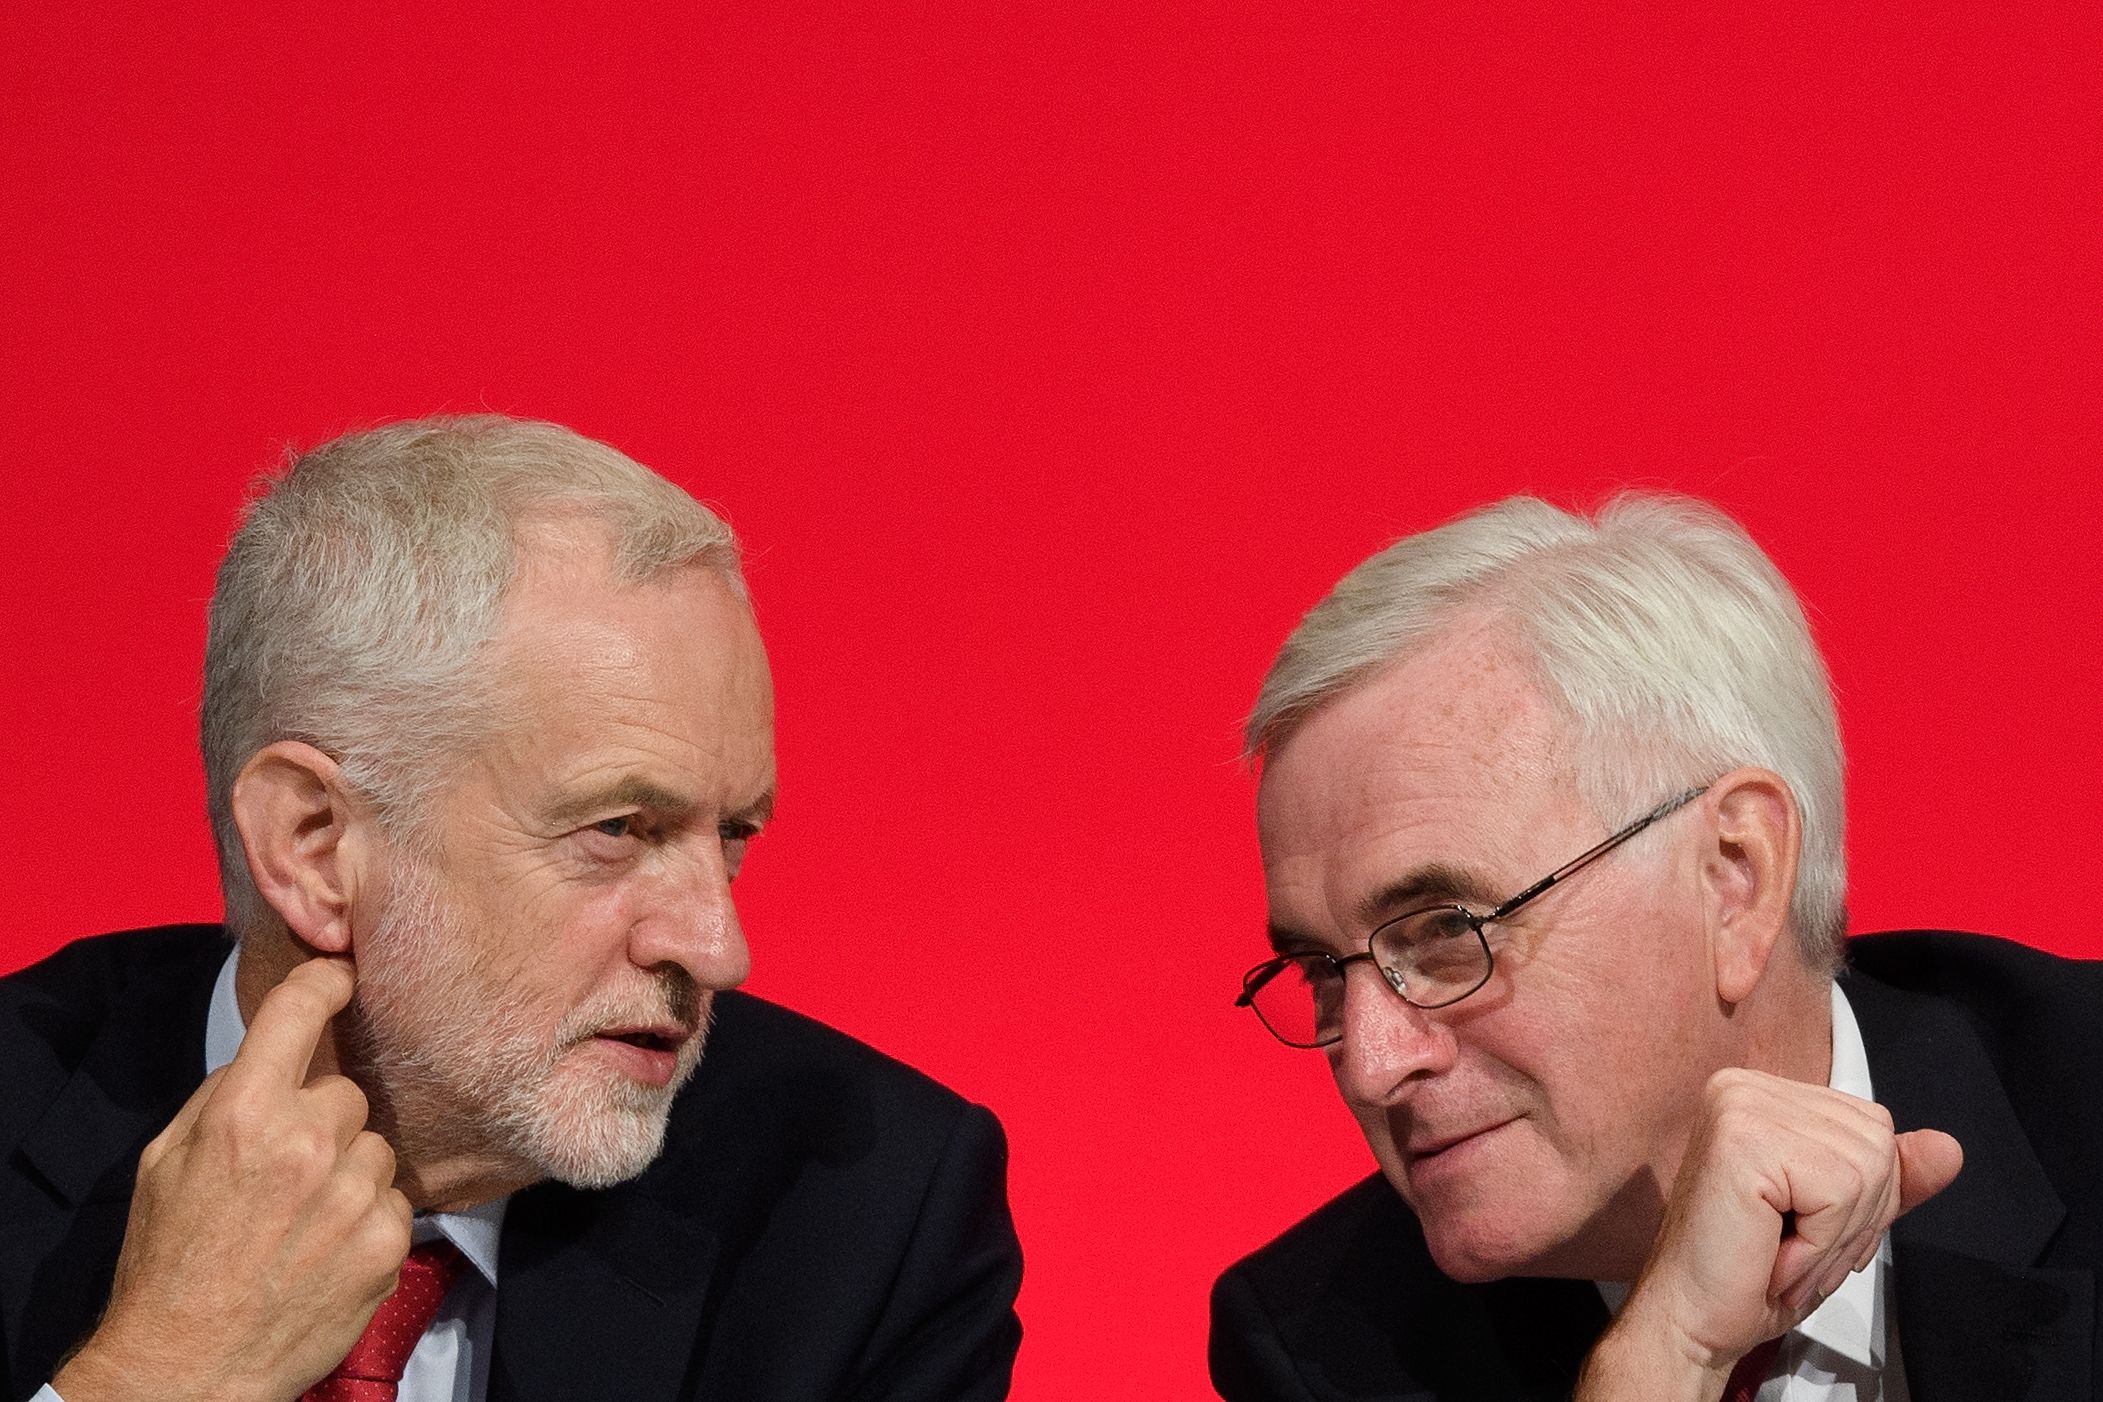 LIVERPOOL, ENGLAND - SEPTEMBER 24: Labour Party leader Jeremy Corbyn (L) sits with Shadow Chancellor of the Exchequer John McDonnell ahead of McDonnell's speech to delegates in the Exhibition Centre Liverpool during day two of the annual Labour Party conference on September 24, 2018 in Liverpool, England. Labour's official slogan for the conference is ?Rebuilding Britain, for the many, not the few?. (Photo by Leon Neal/Getty Images)